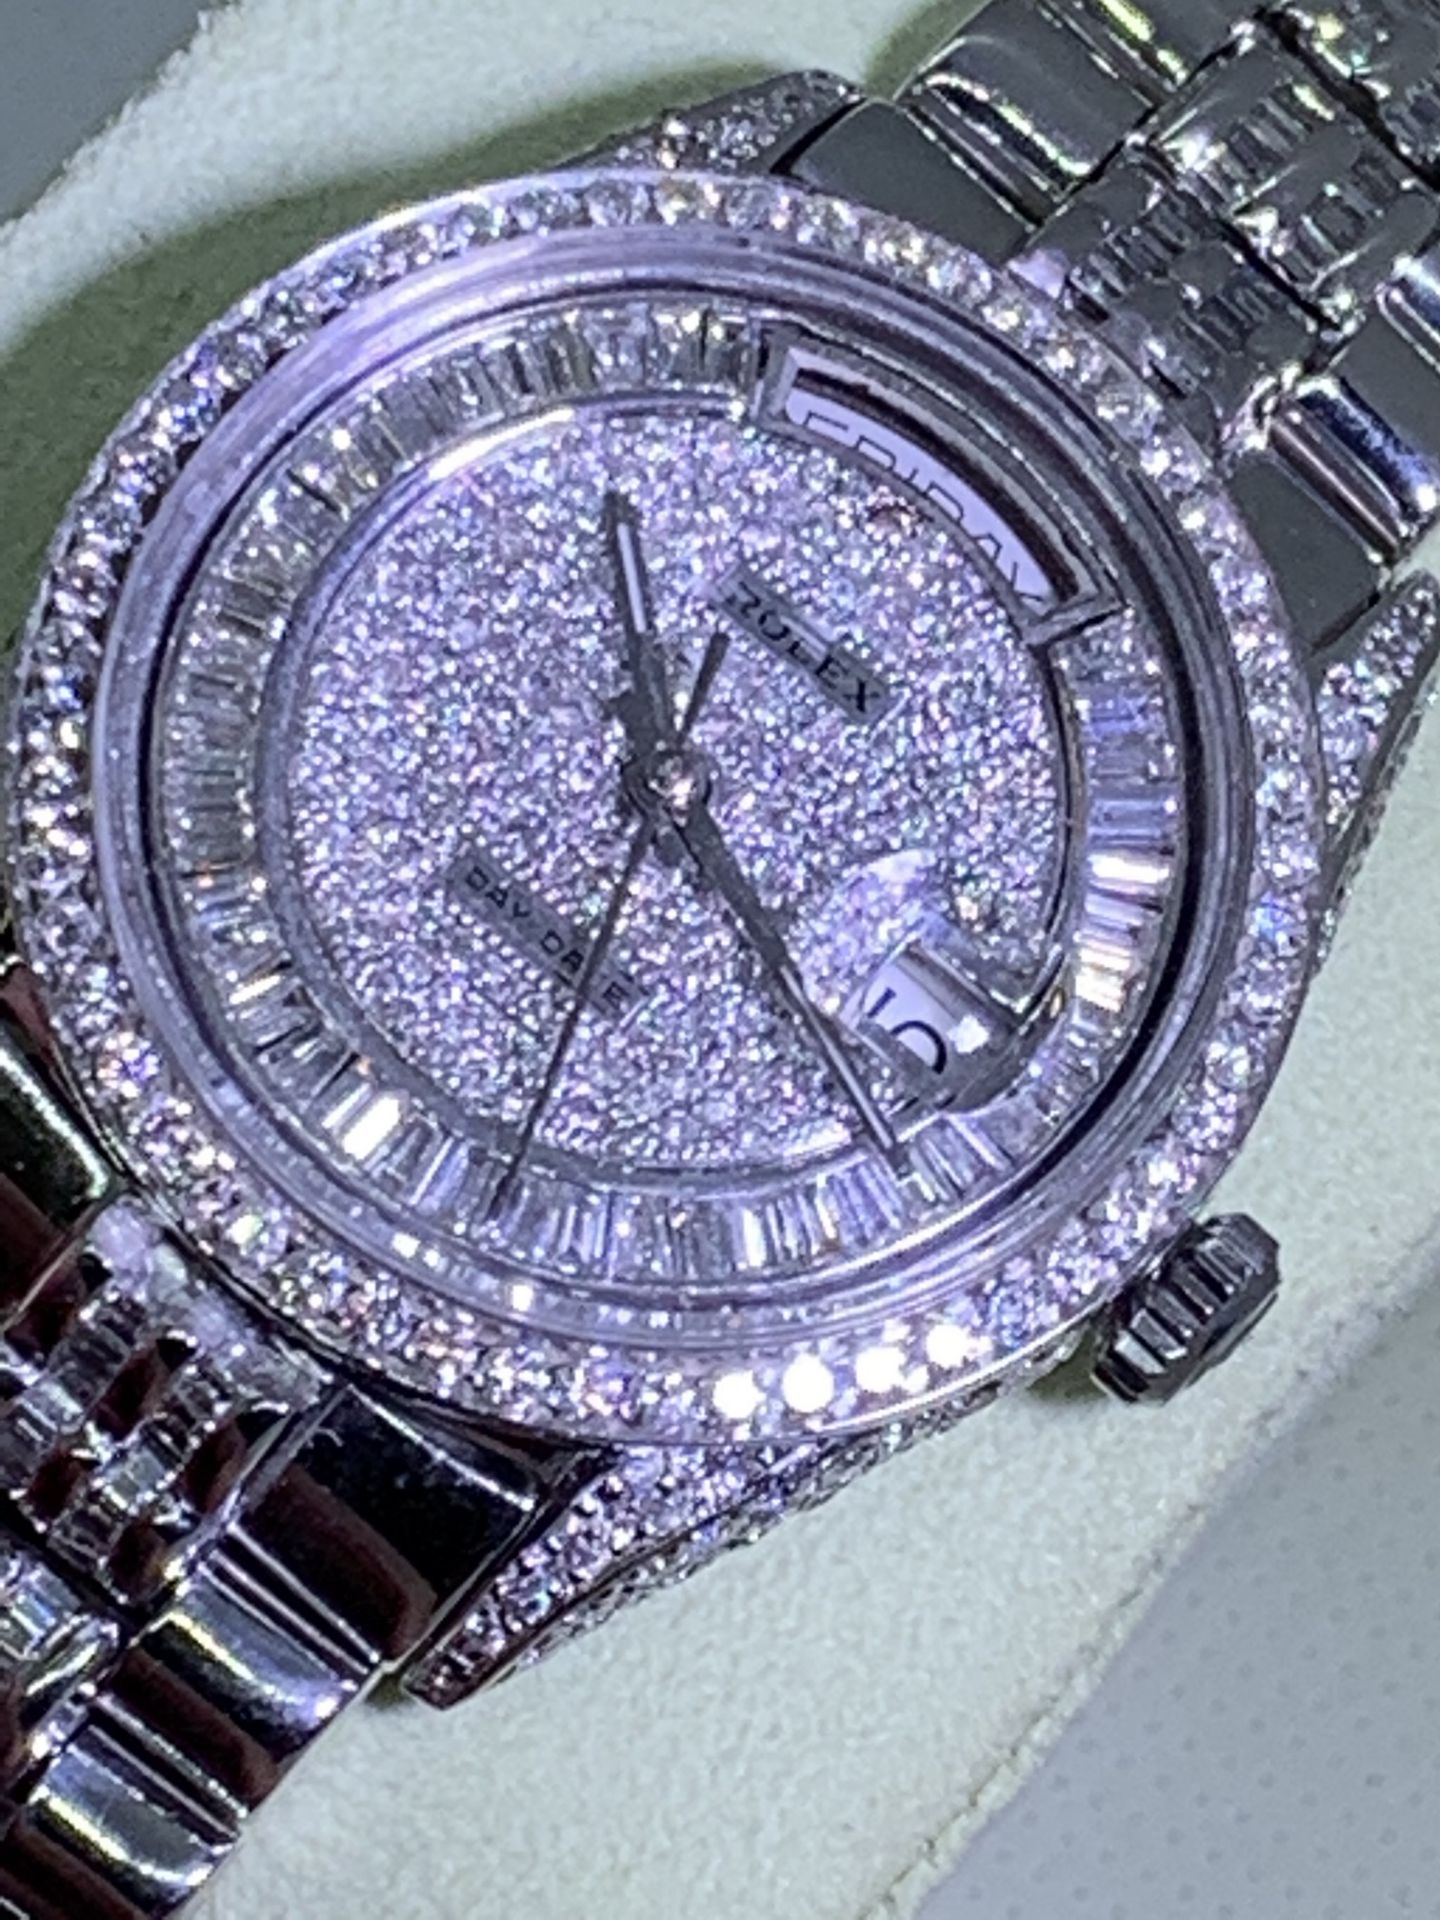 Diamond Encrusted Mens 36mm Day-Date, Solid White Gold - Diamond/ “Super President” Marked ROLEX - Image 15 of 18